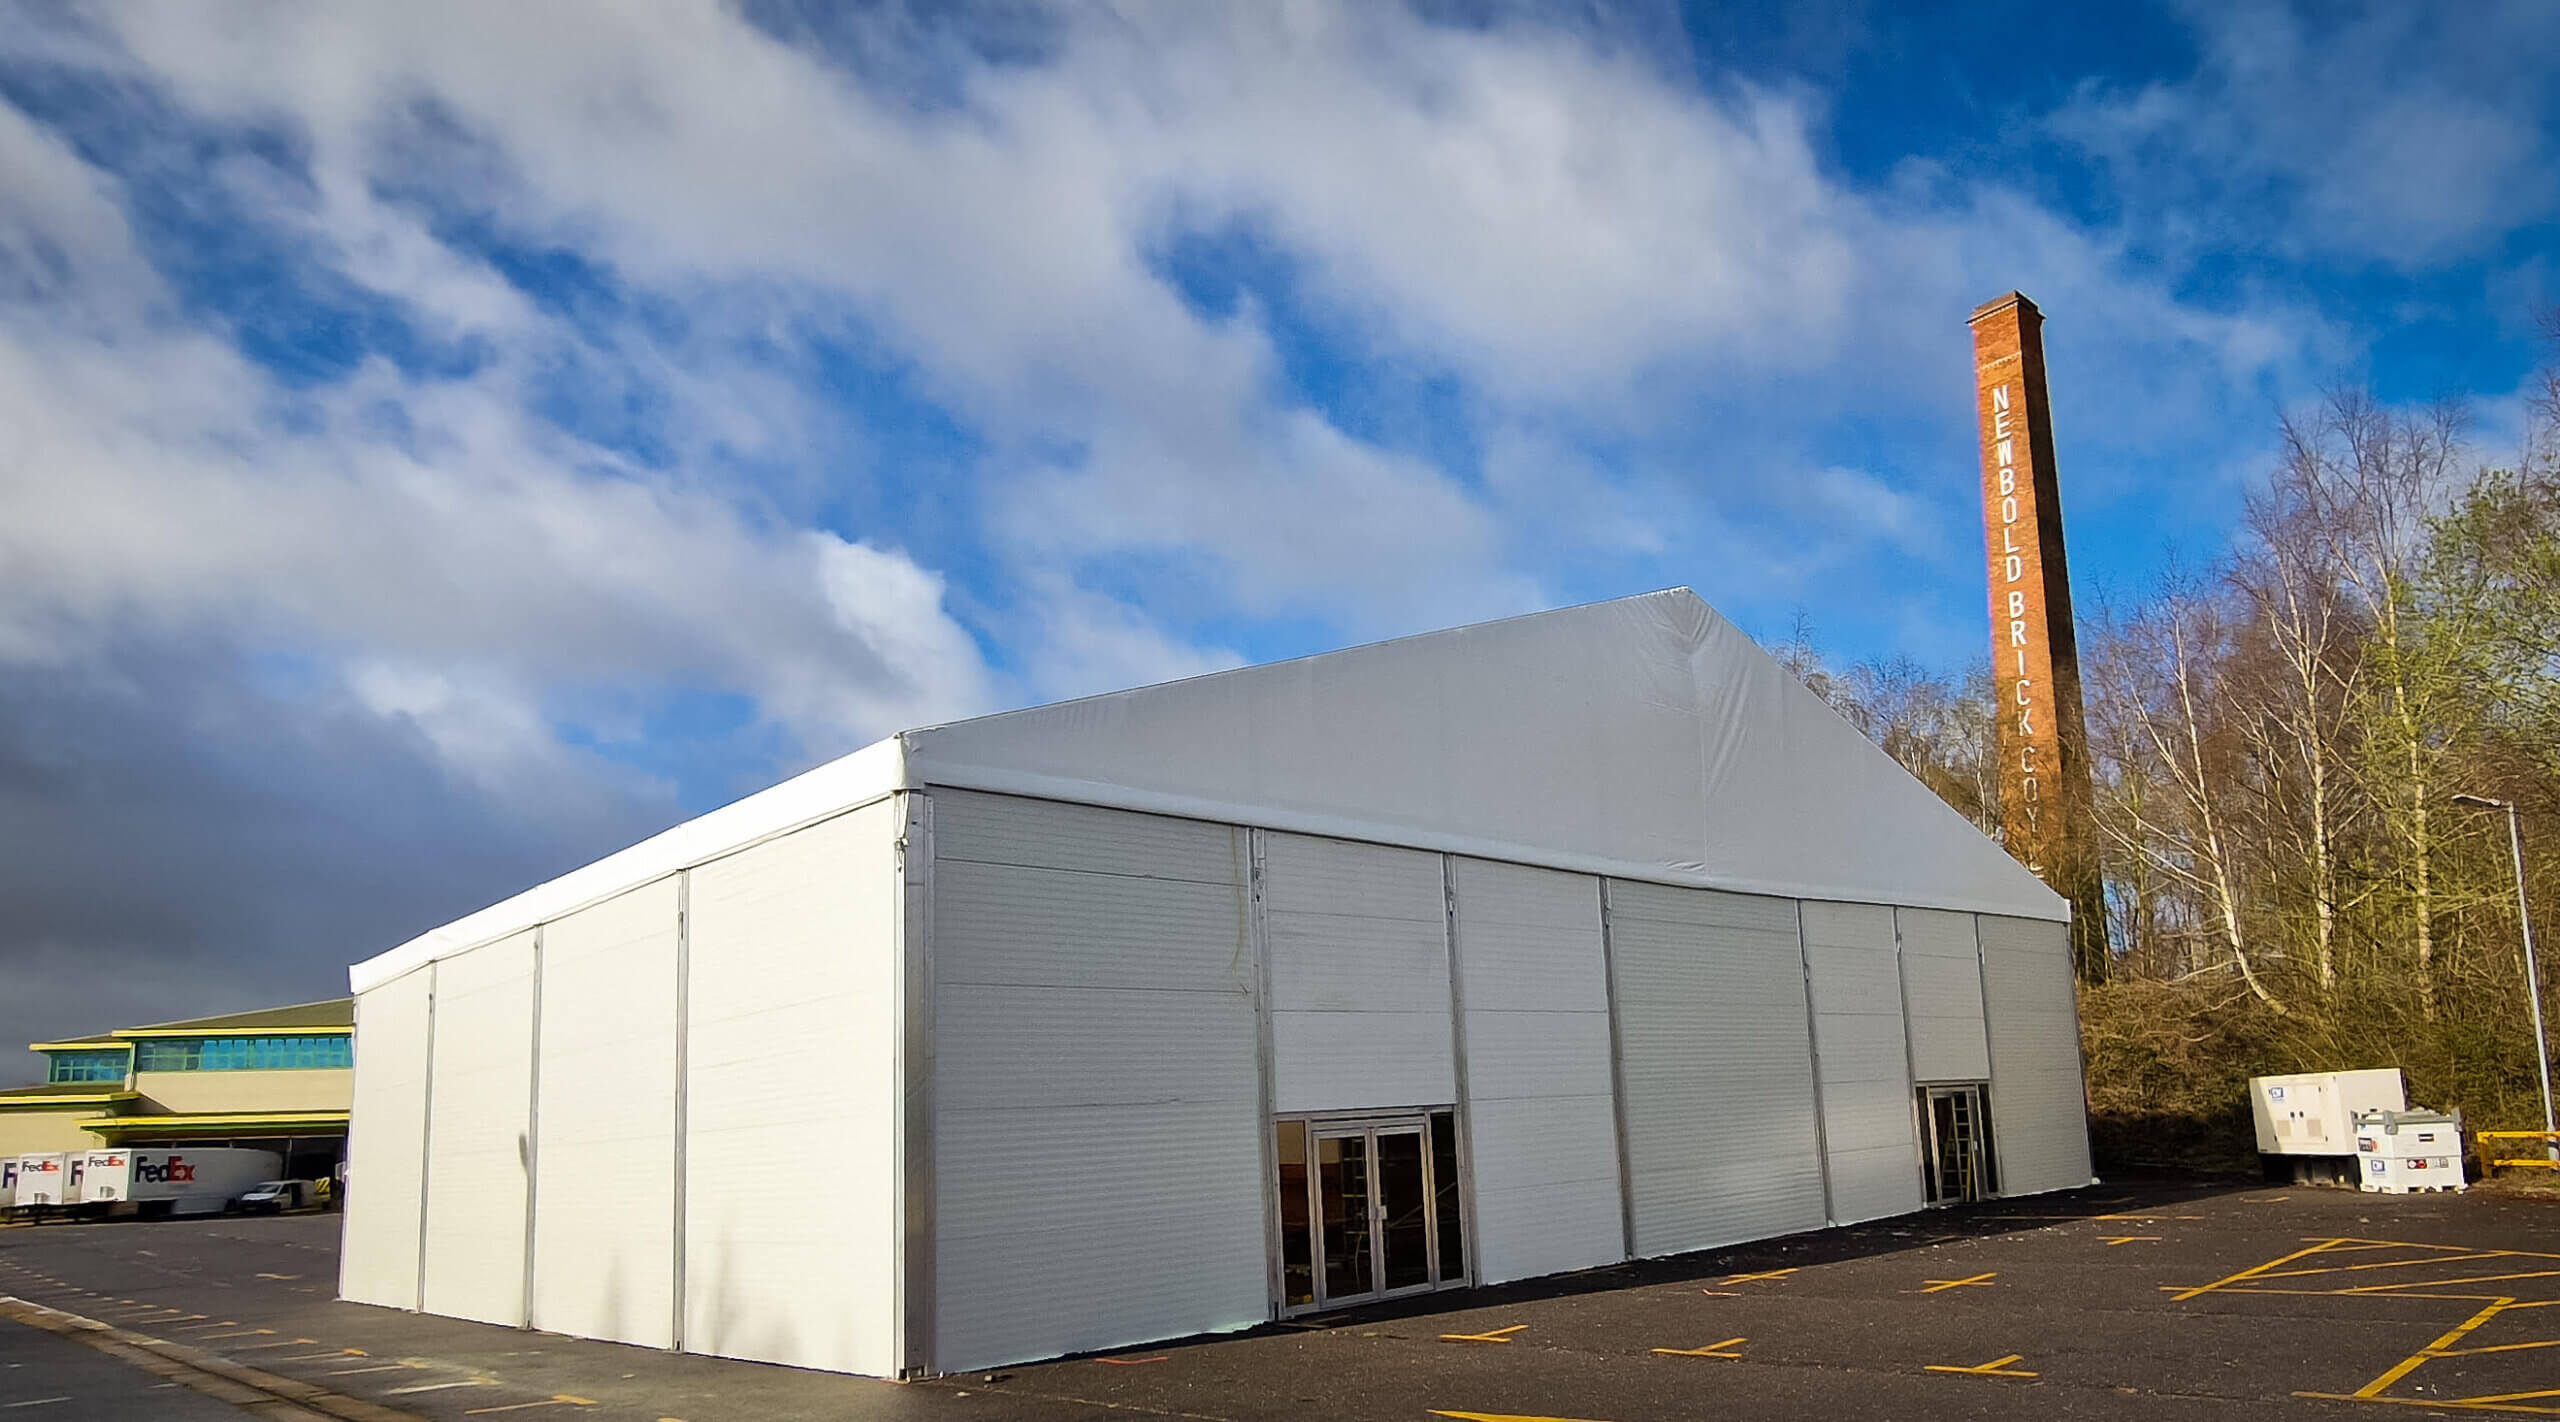 Hire or Buy Temporary Structures